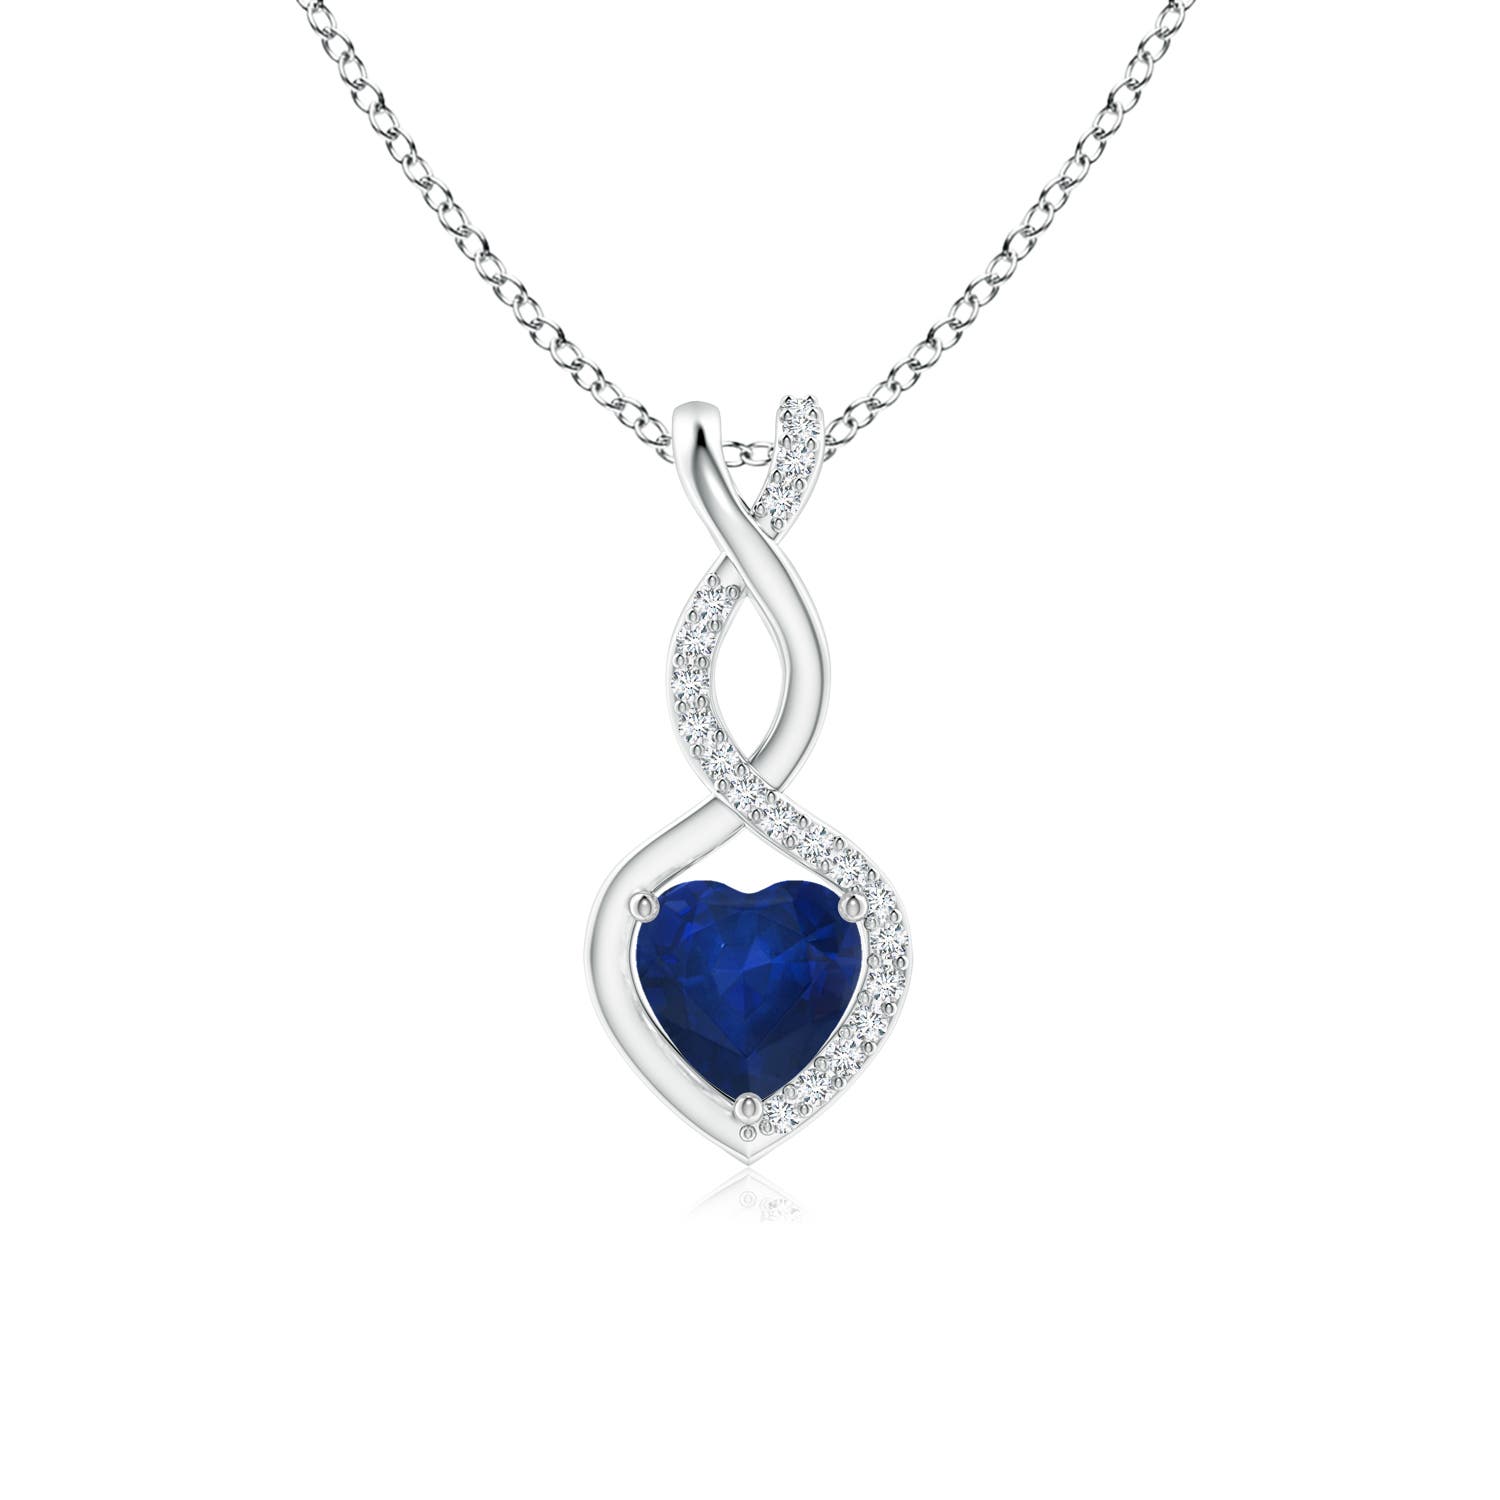 AA - Blue Sapphire / 0.54 CT / 14 KT White Gold